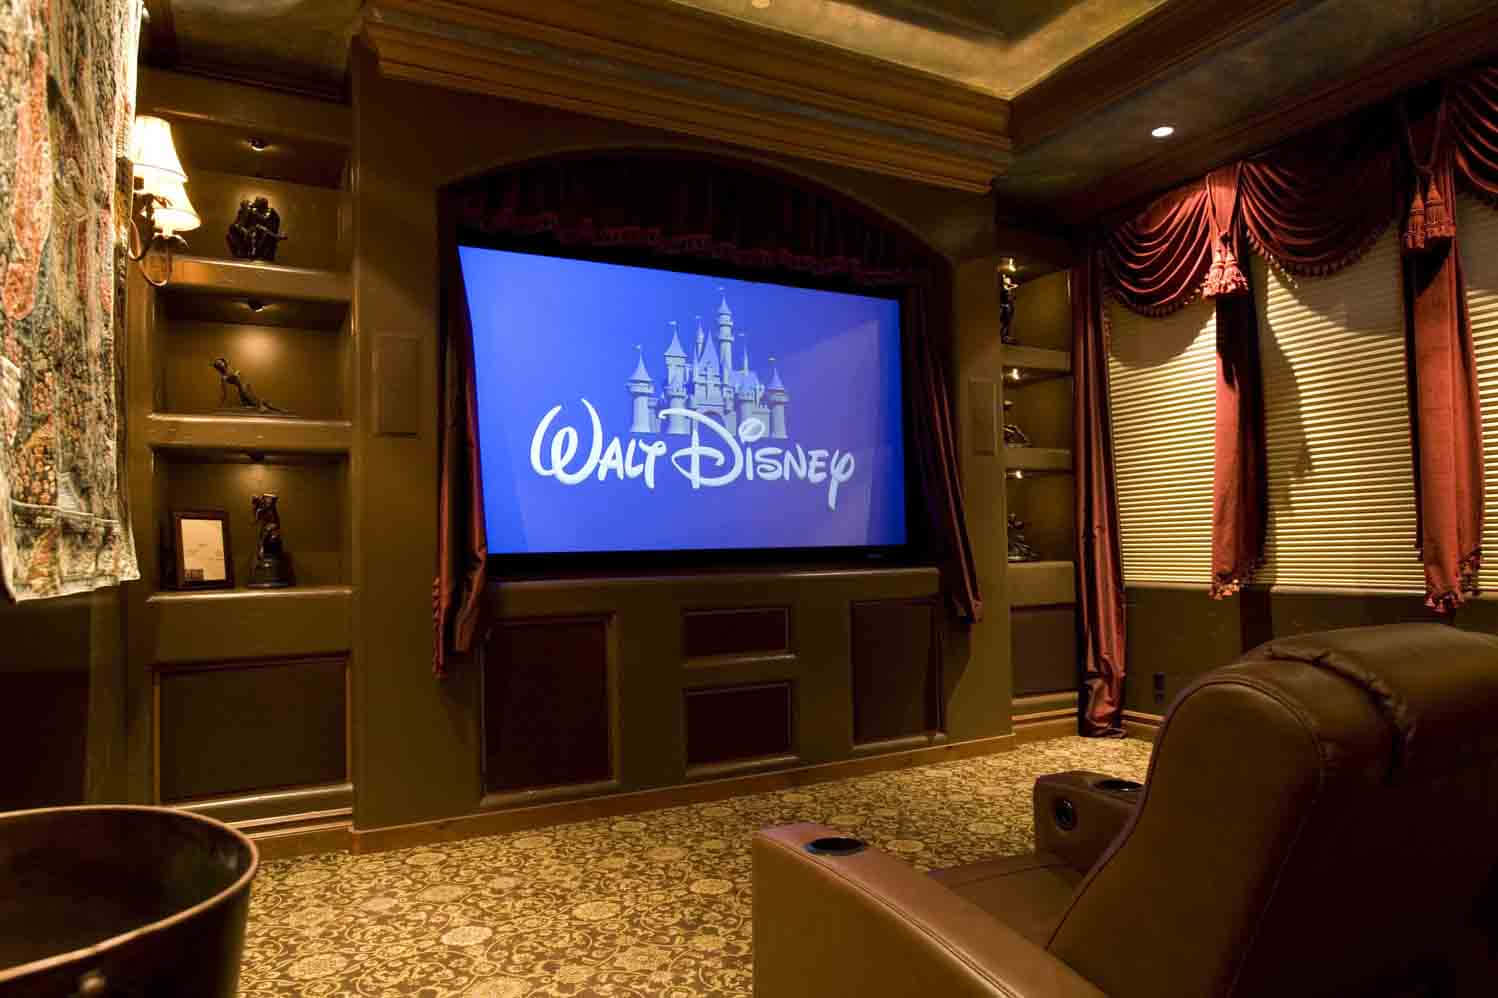 Enjoy your favorite movies and shows with this state-of-the-art home cinema setup. Wallpaper